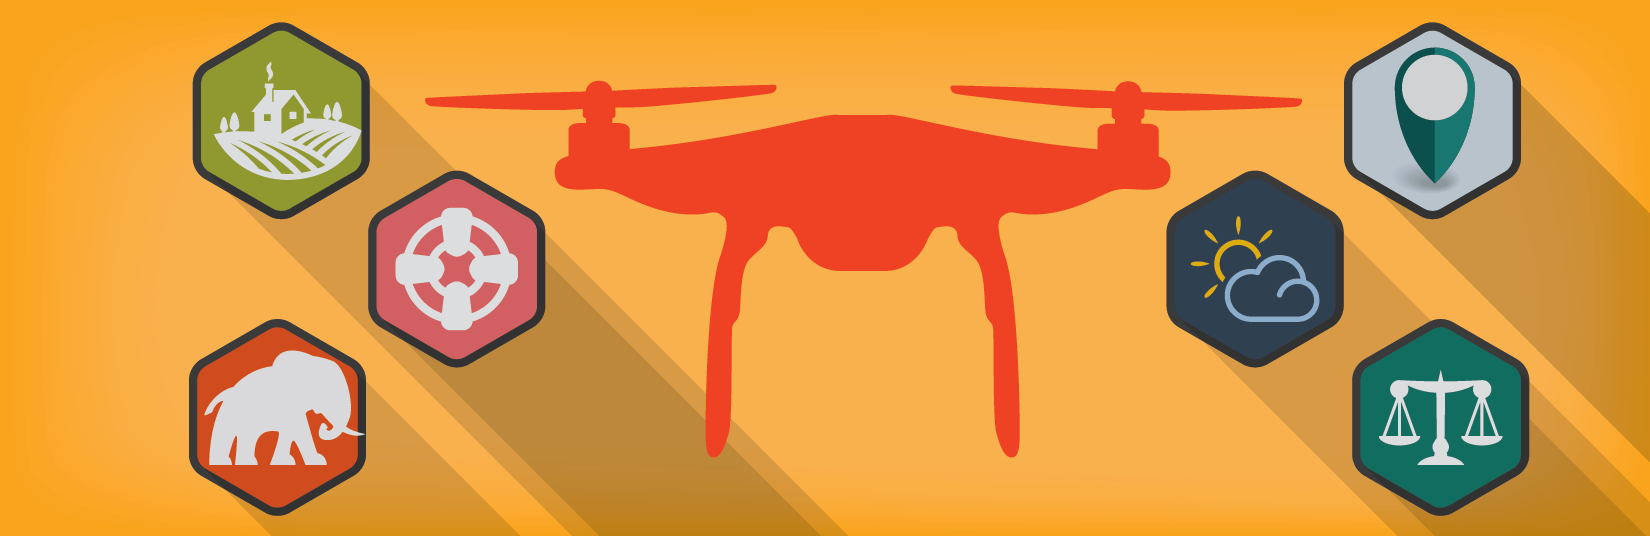 Drone-banner_1-01